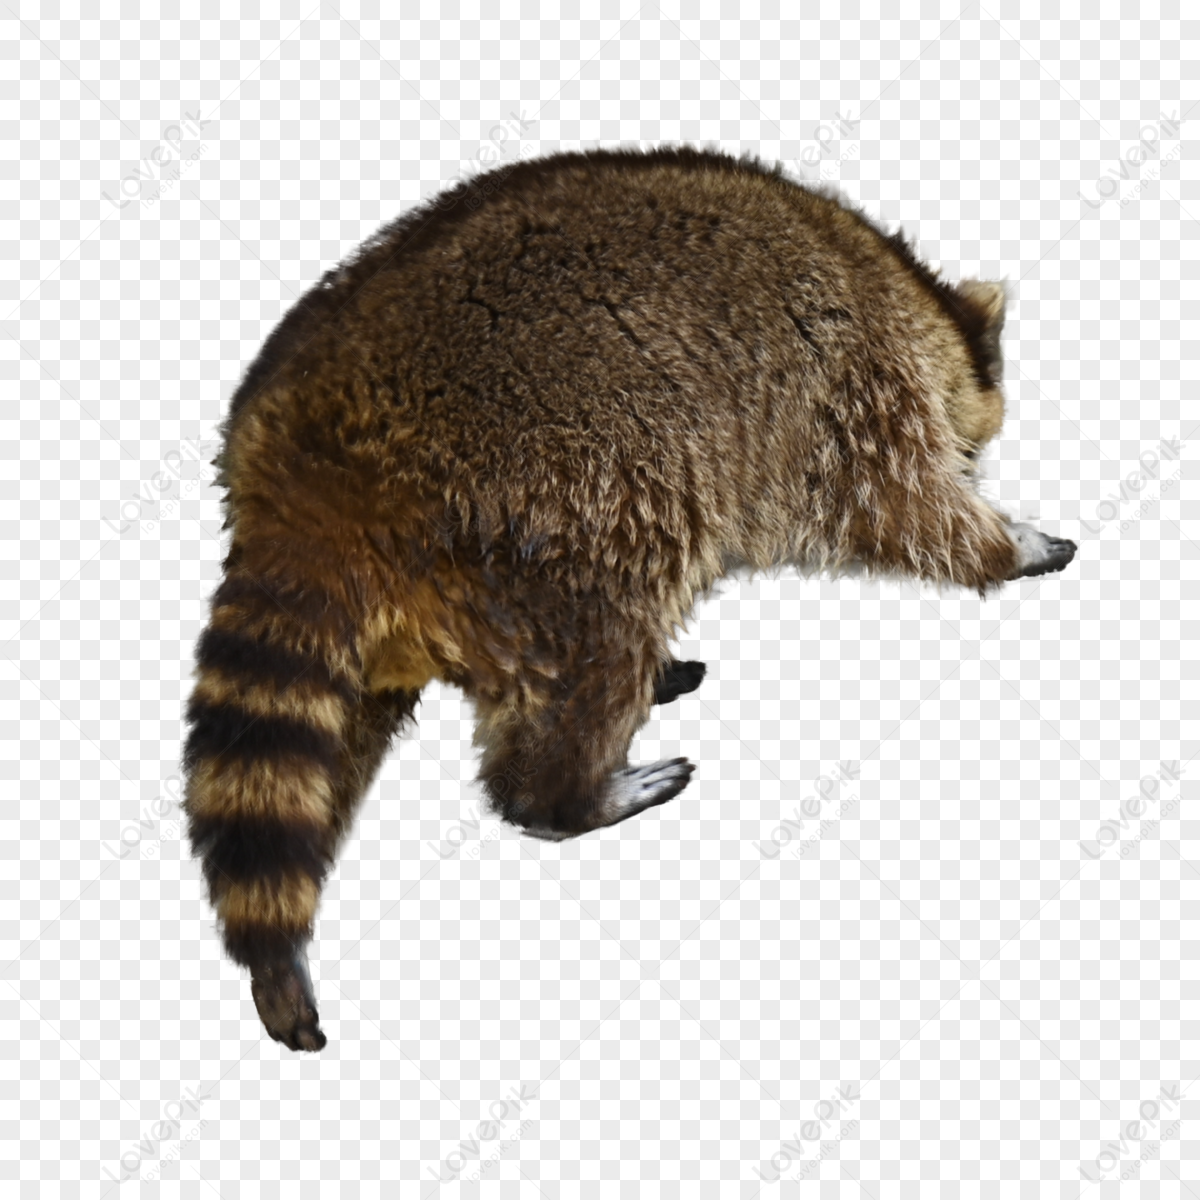 Raccoon Pleasant Animal Plush Clup,whisker,carnivore,cute png image